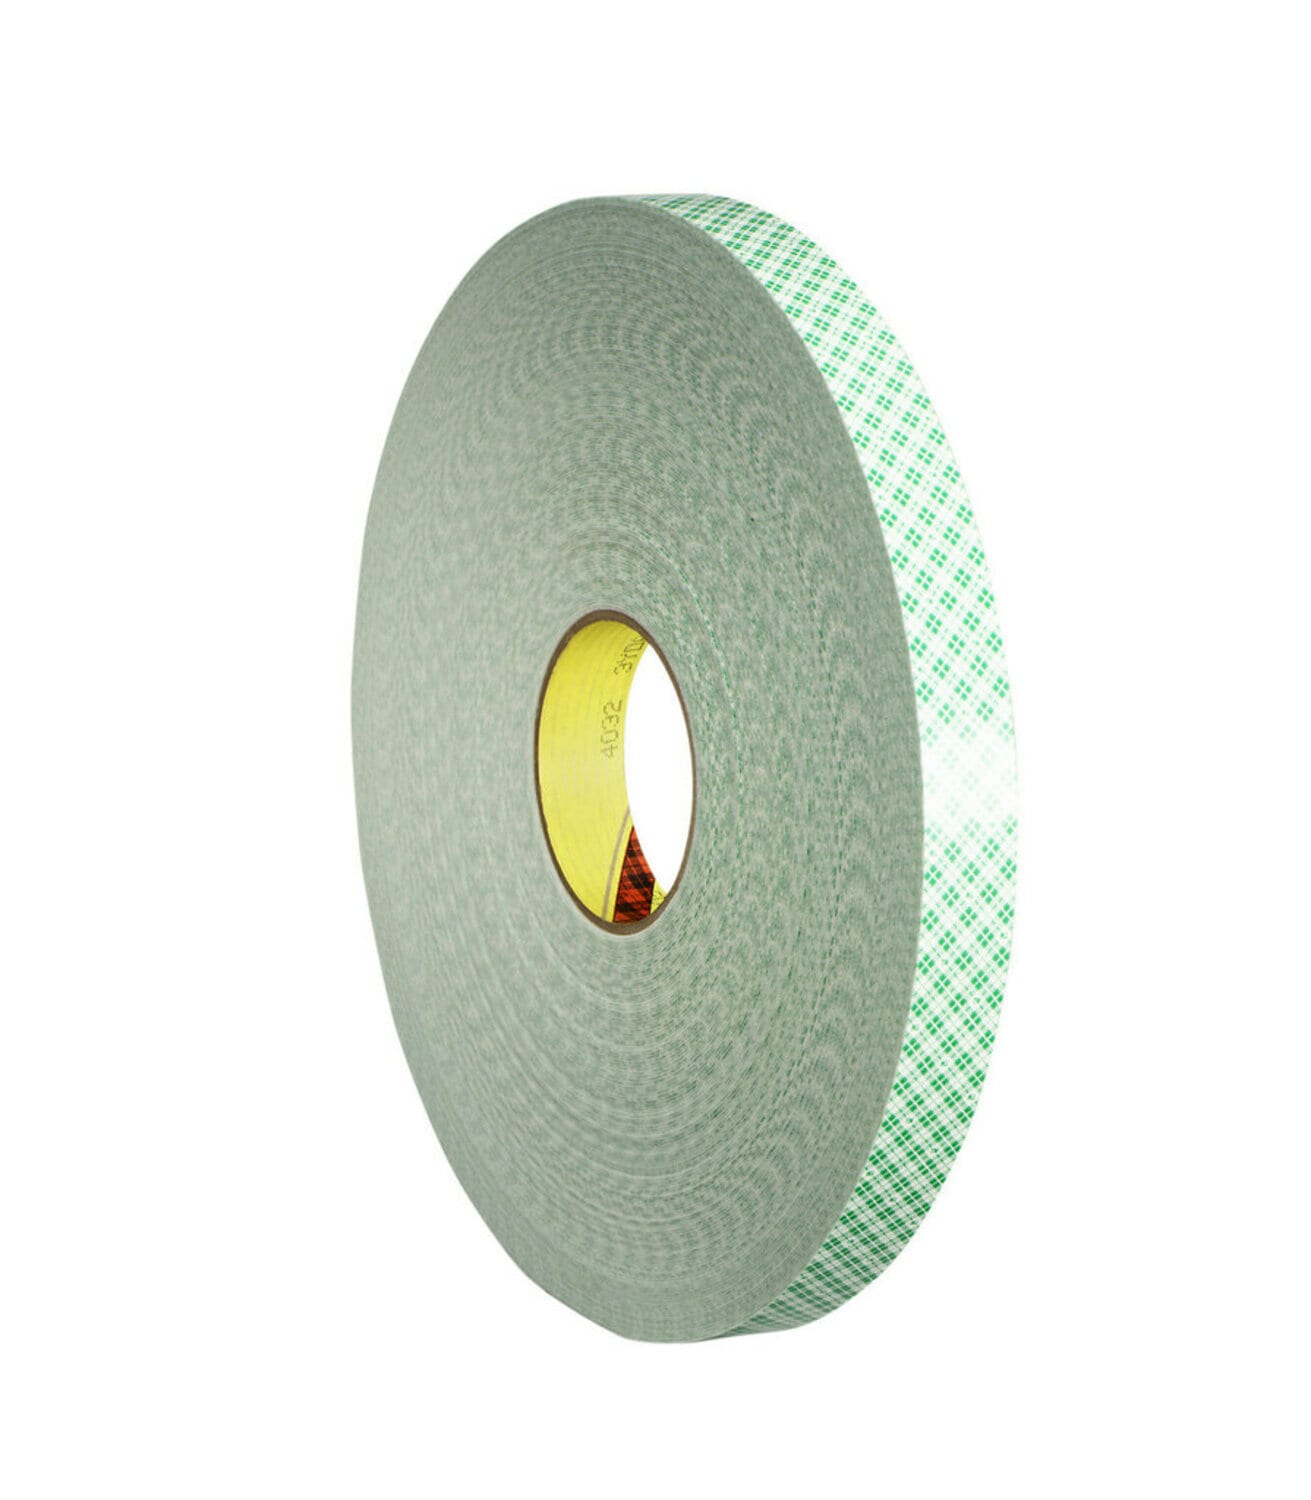 7000048485 - 3M Double Coated Urethane Foam Tape 4032, Off White, 3/4 in x 72 yd, 31
mil, 12 Rolls/Case